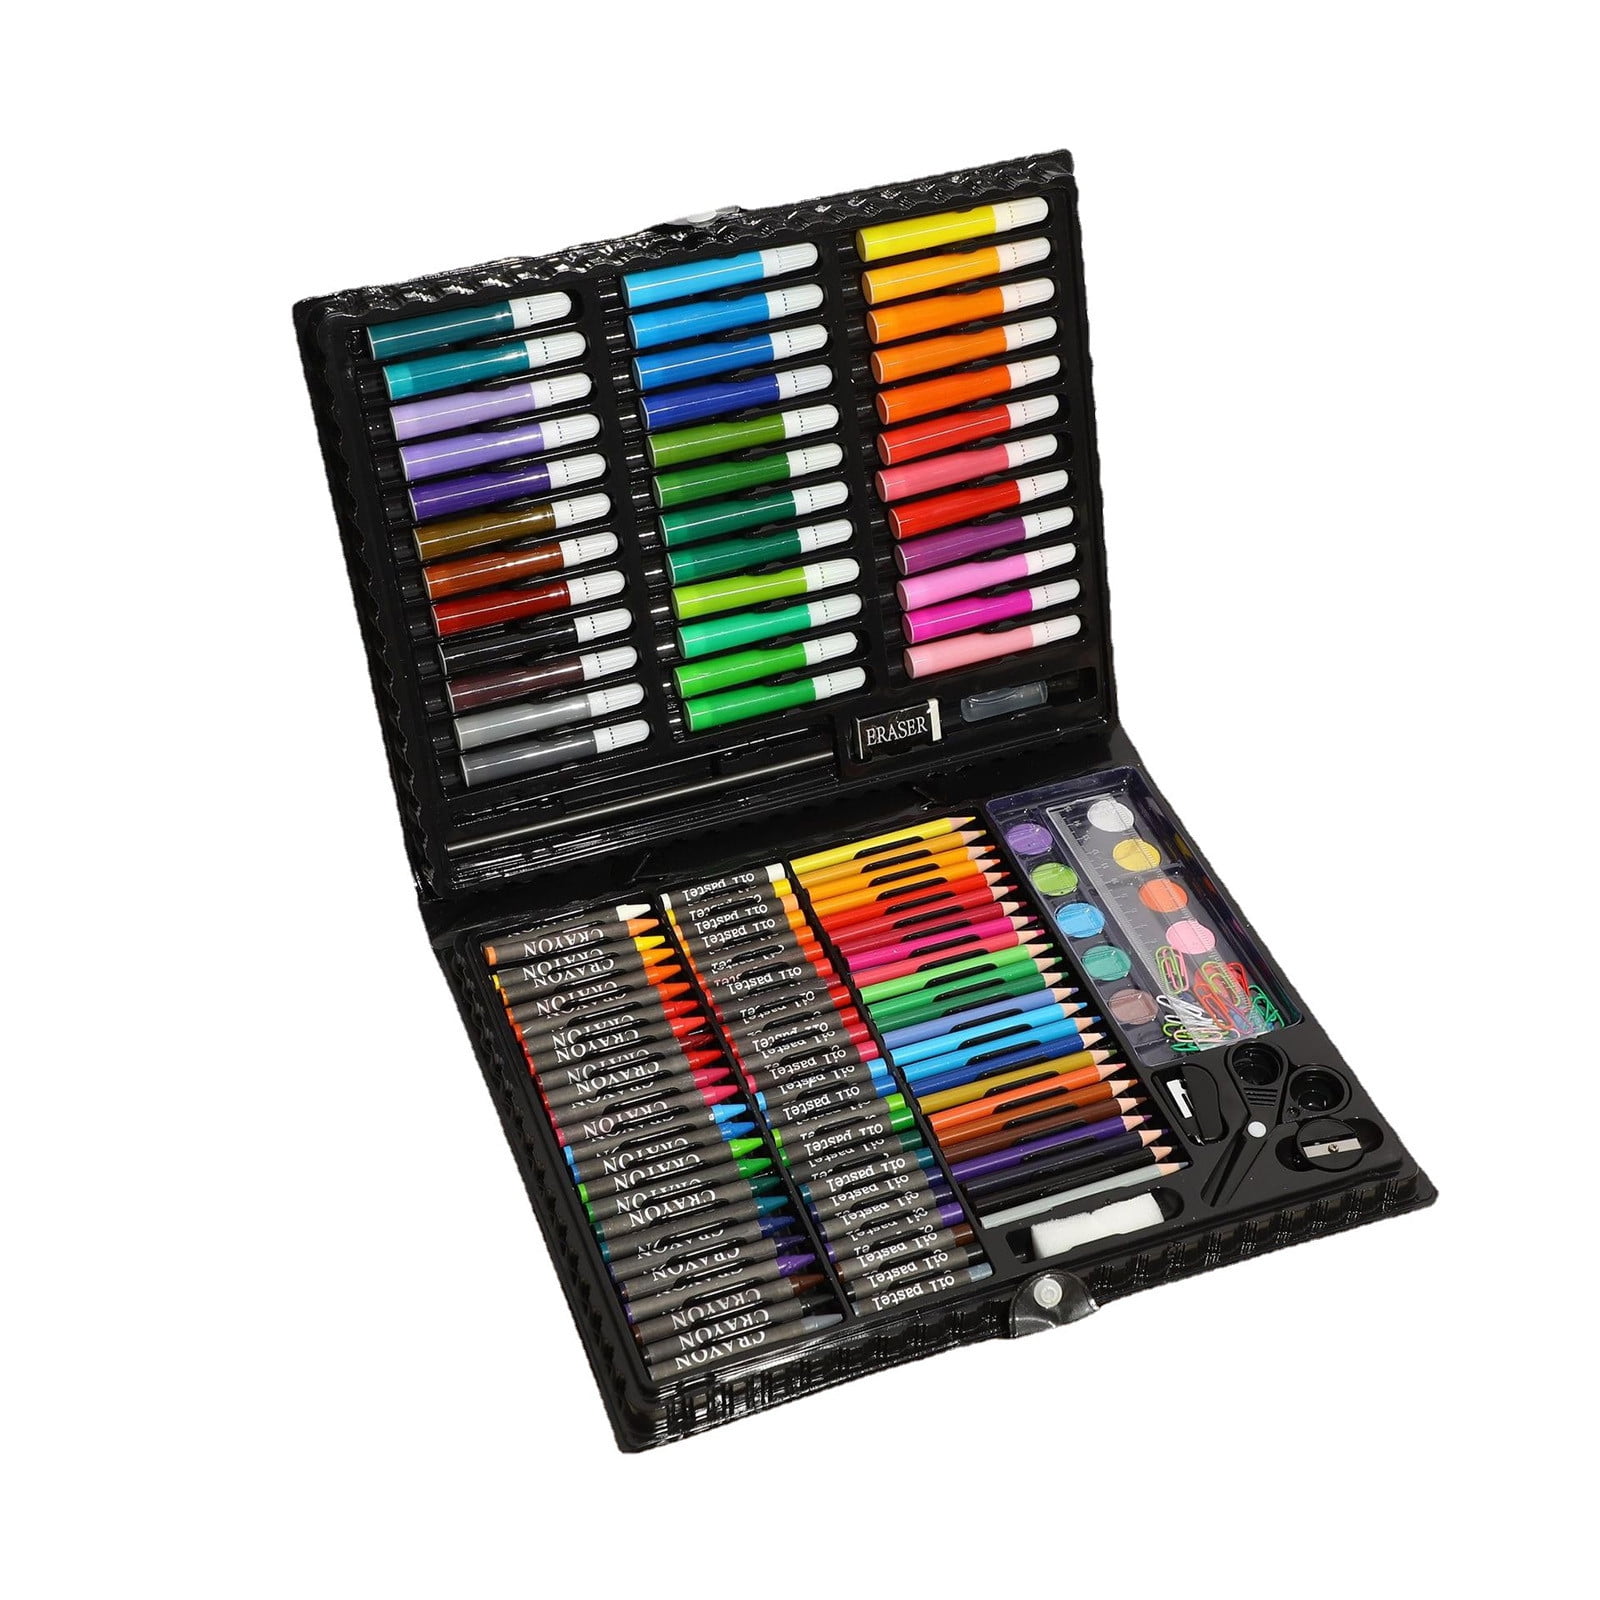 Codream 150 Piece Deluxe Art Set, Artist Drawing&Painting Set, Art Supplies  with Plastic Case, Professional Art Kit for Kids, Teens and Adults